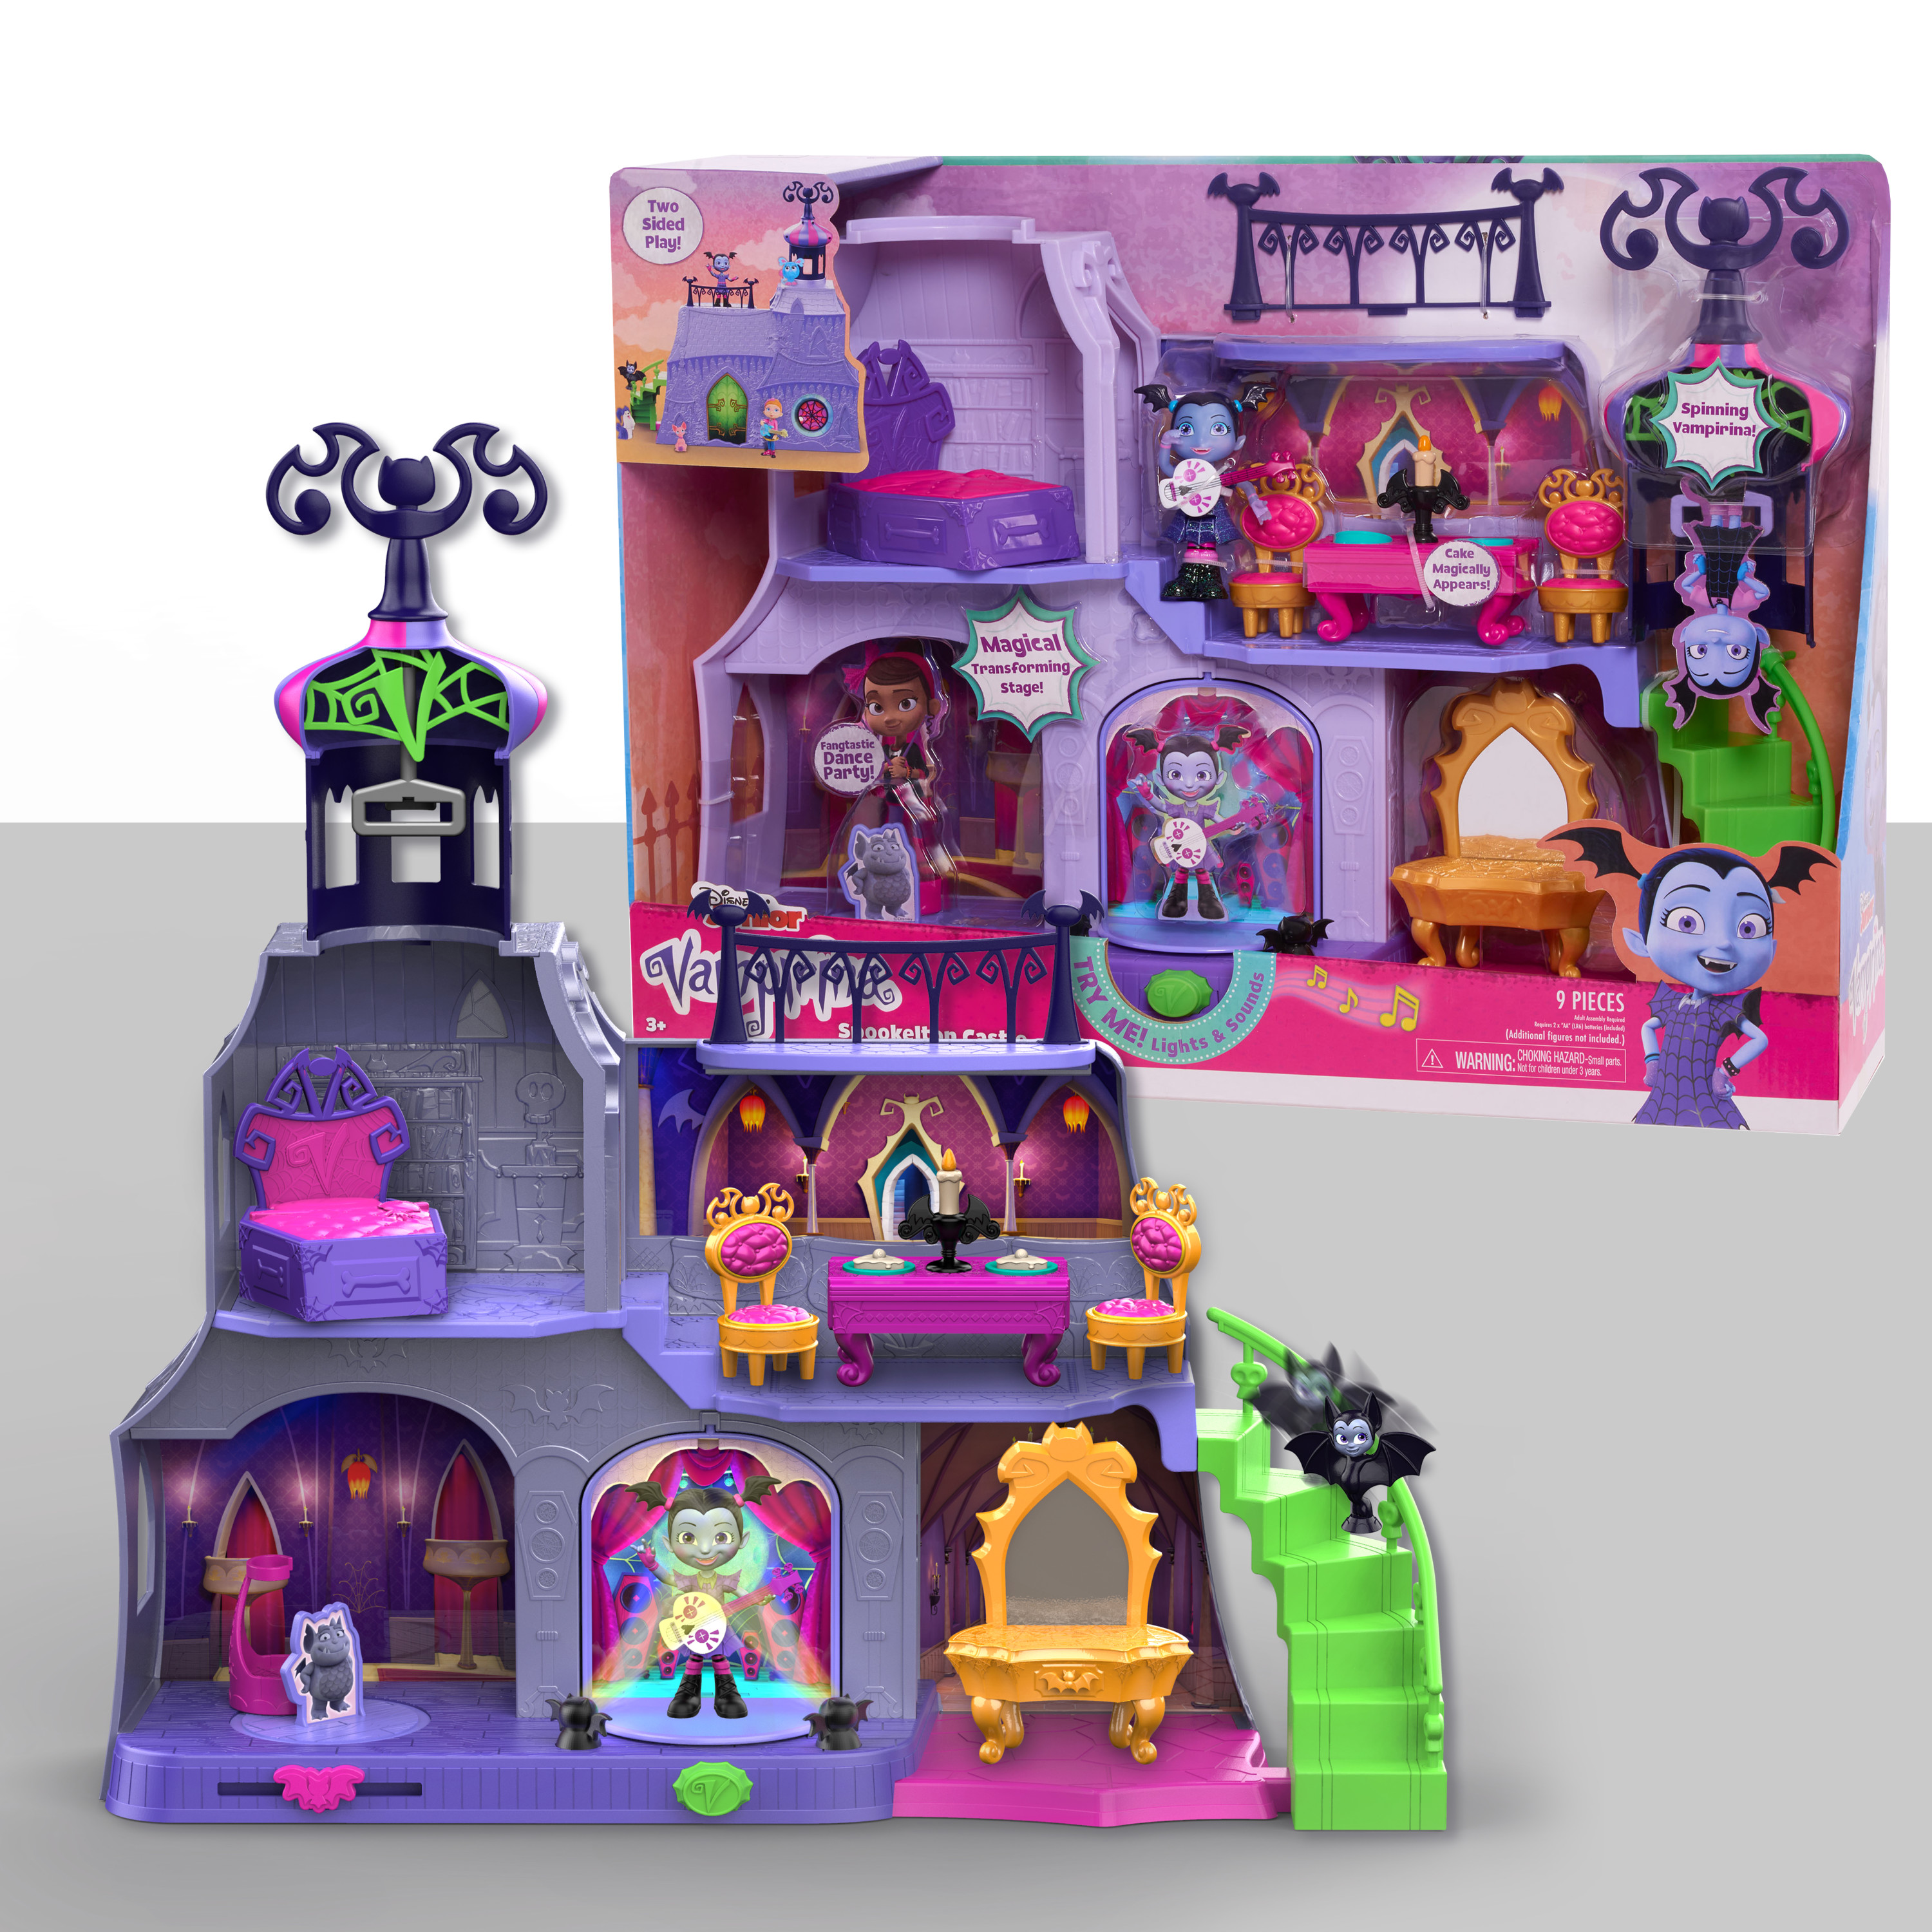 Disney Junior Vampirina Spookelton Castle, 8 Piece Dollhouse Playset with Lights and Sounds, Officially Licensed Kids Toys for Ages 3 Up, Gifts and Presents - image 1 of 3